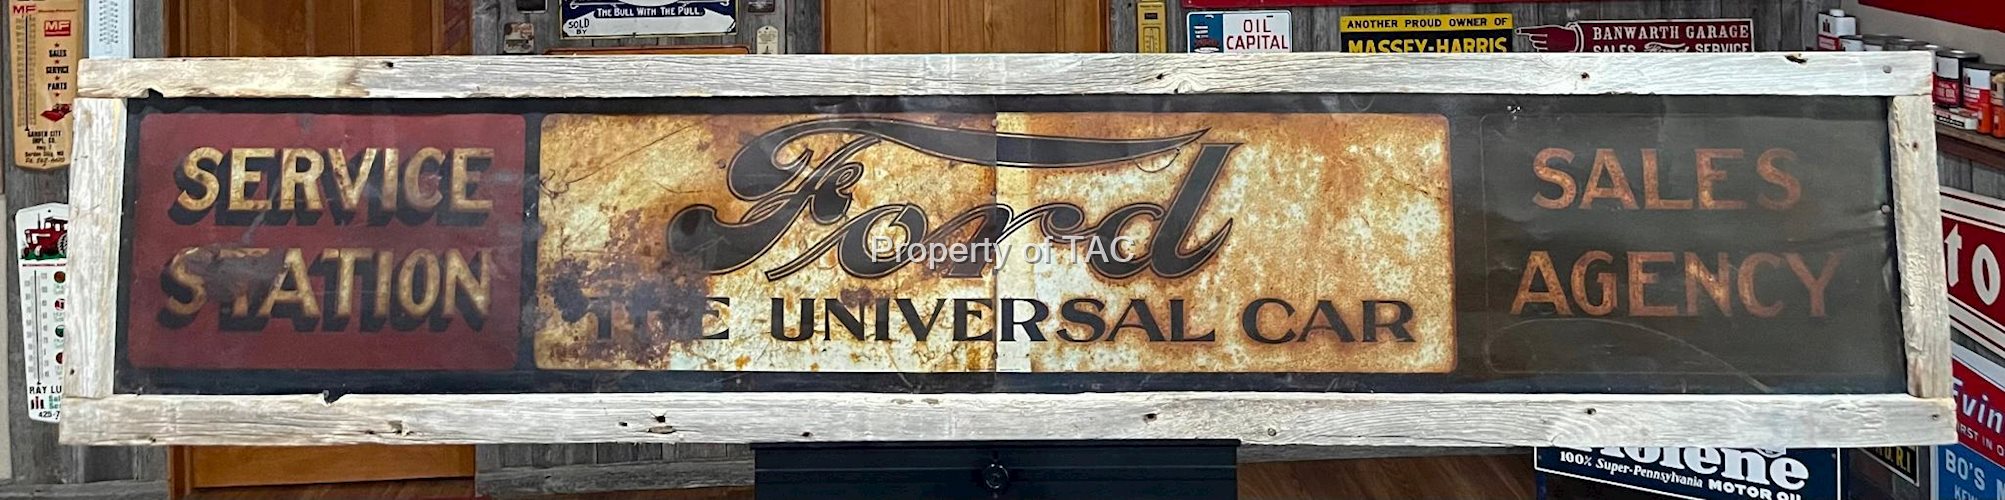 Ford "The Universal Car Service Station Sales Agency Metal Sign